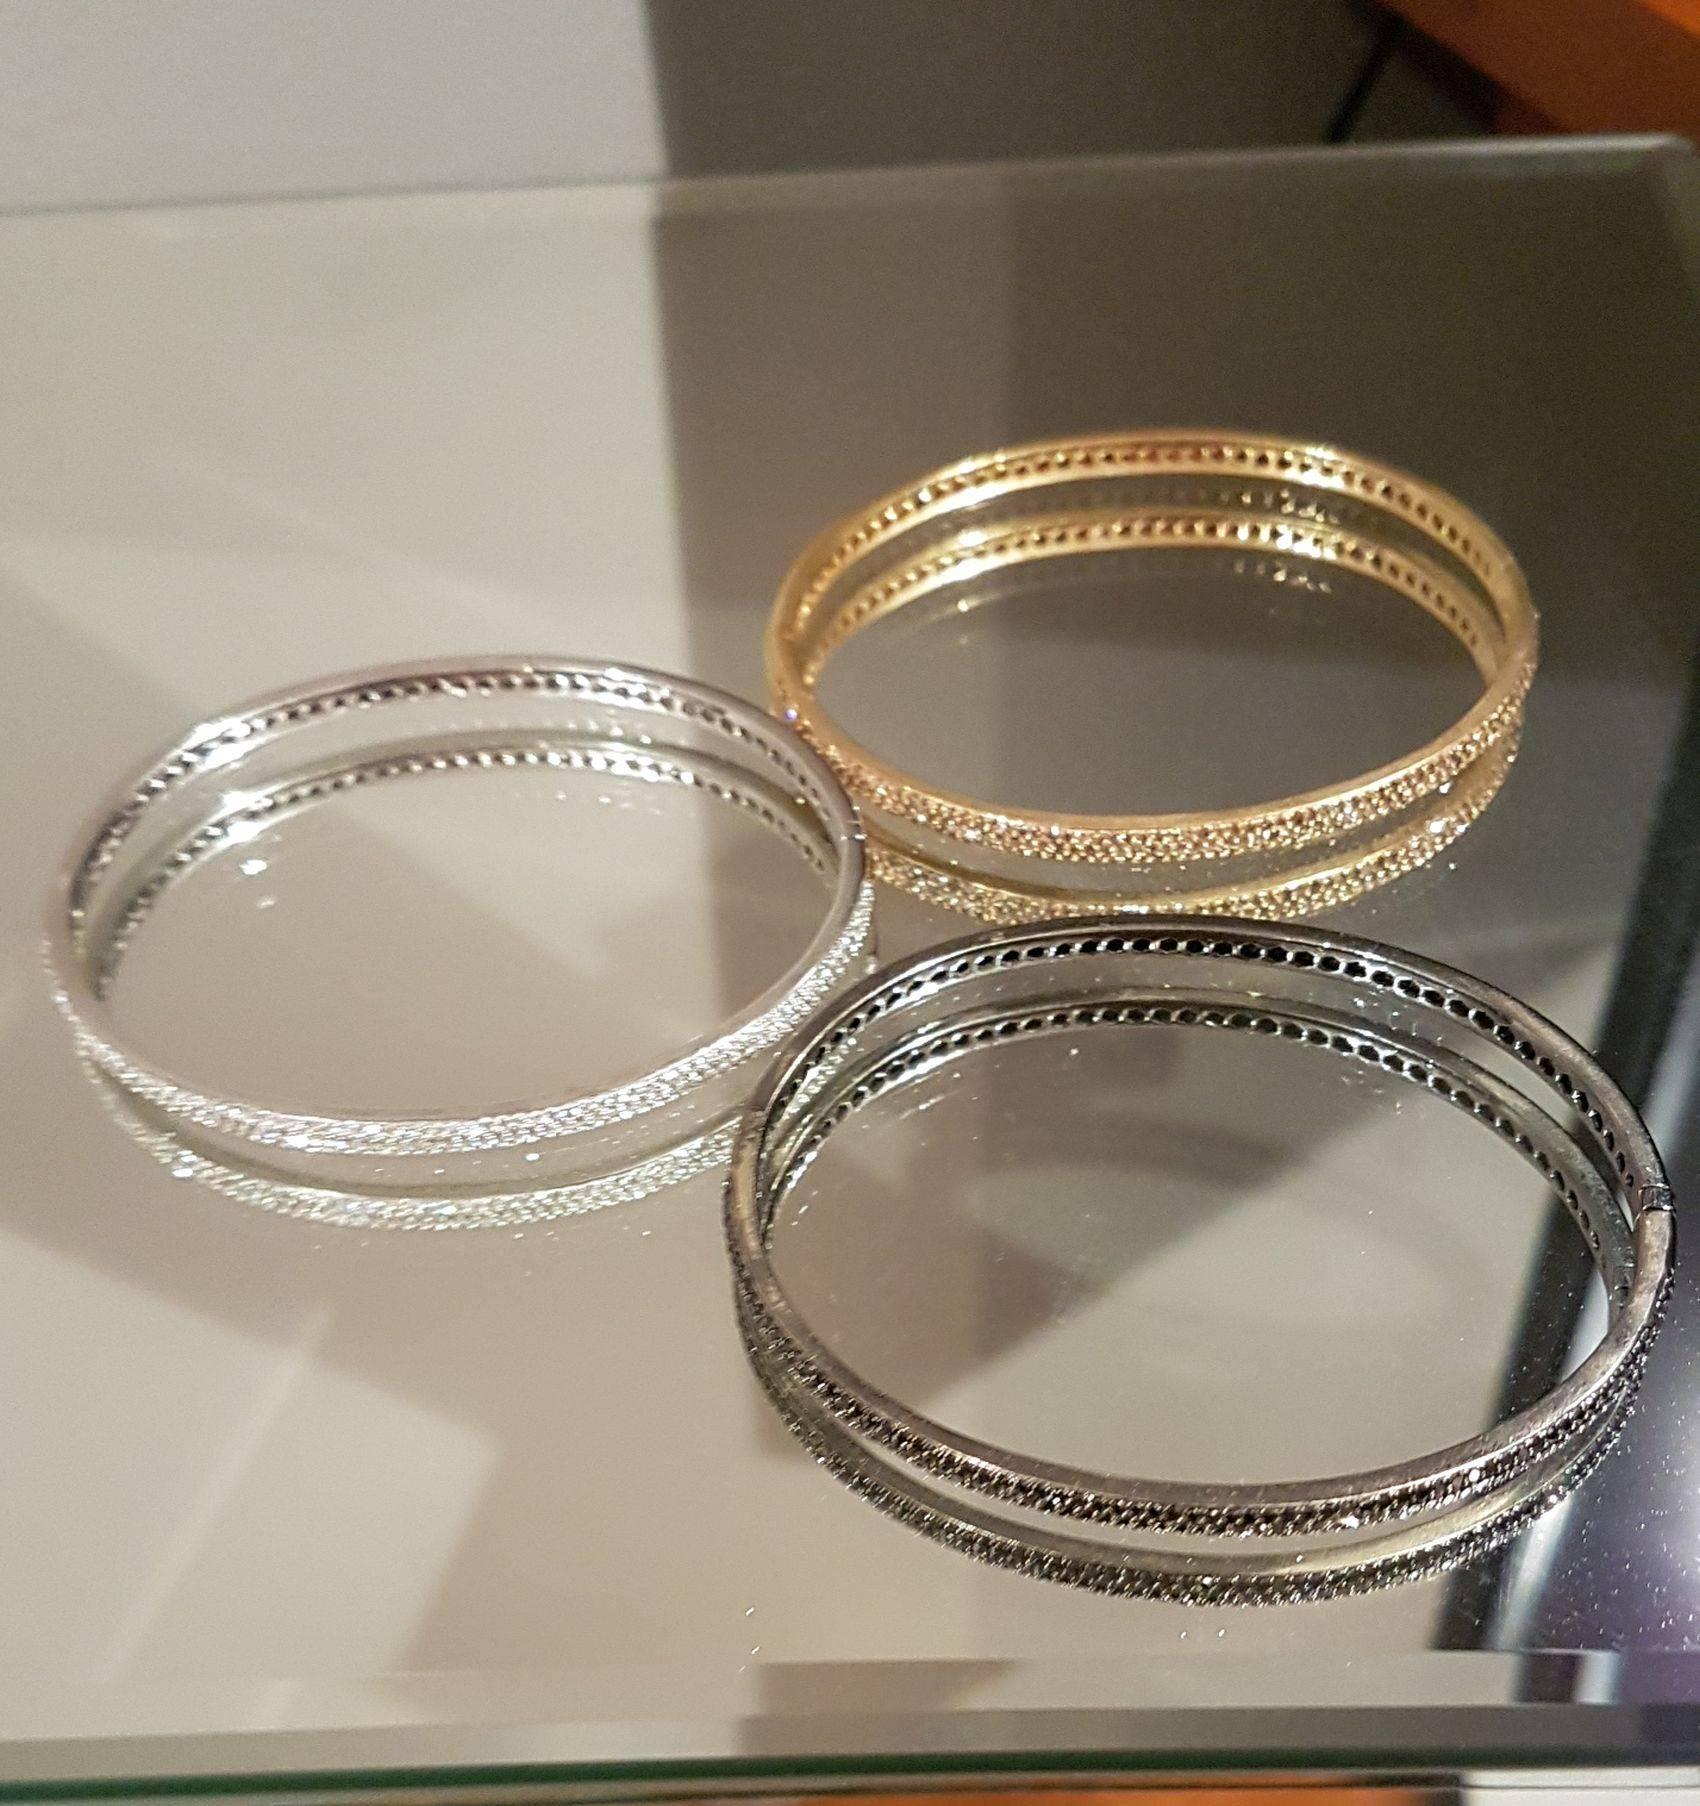 Three stunning diamond bracelets.  These bracelets are by Pascal which was re-branded as Annoushka so very high end and worn by a number of famous names (Gwyneth Paltrow etc).  The bangles are three different colours of gold and three different